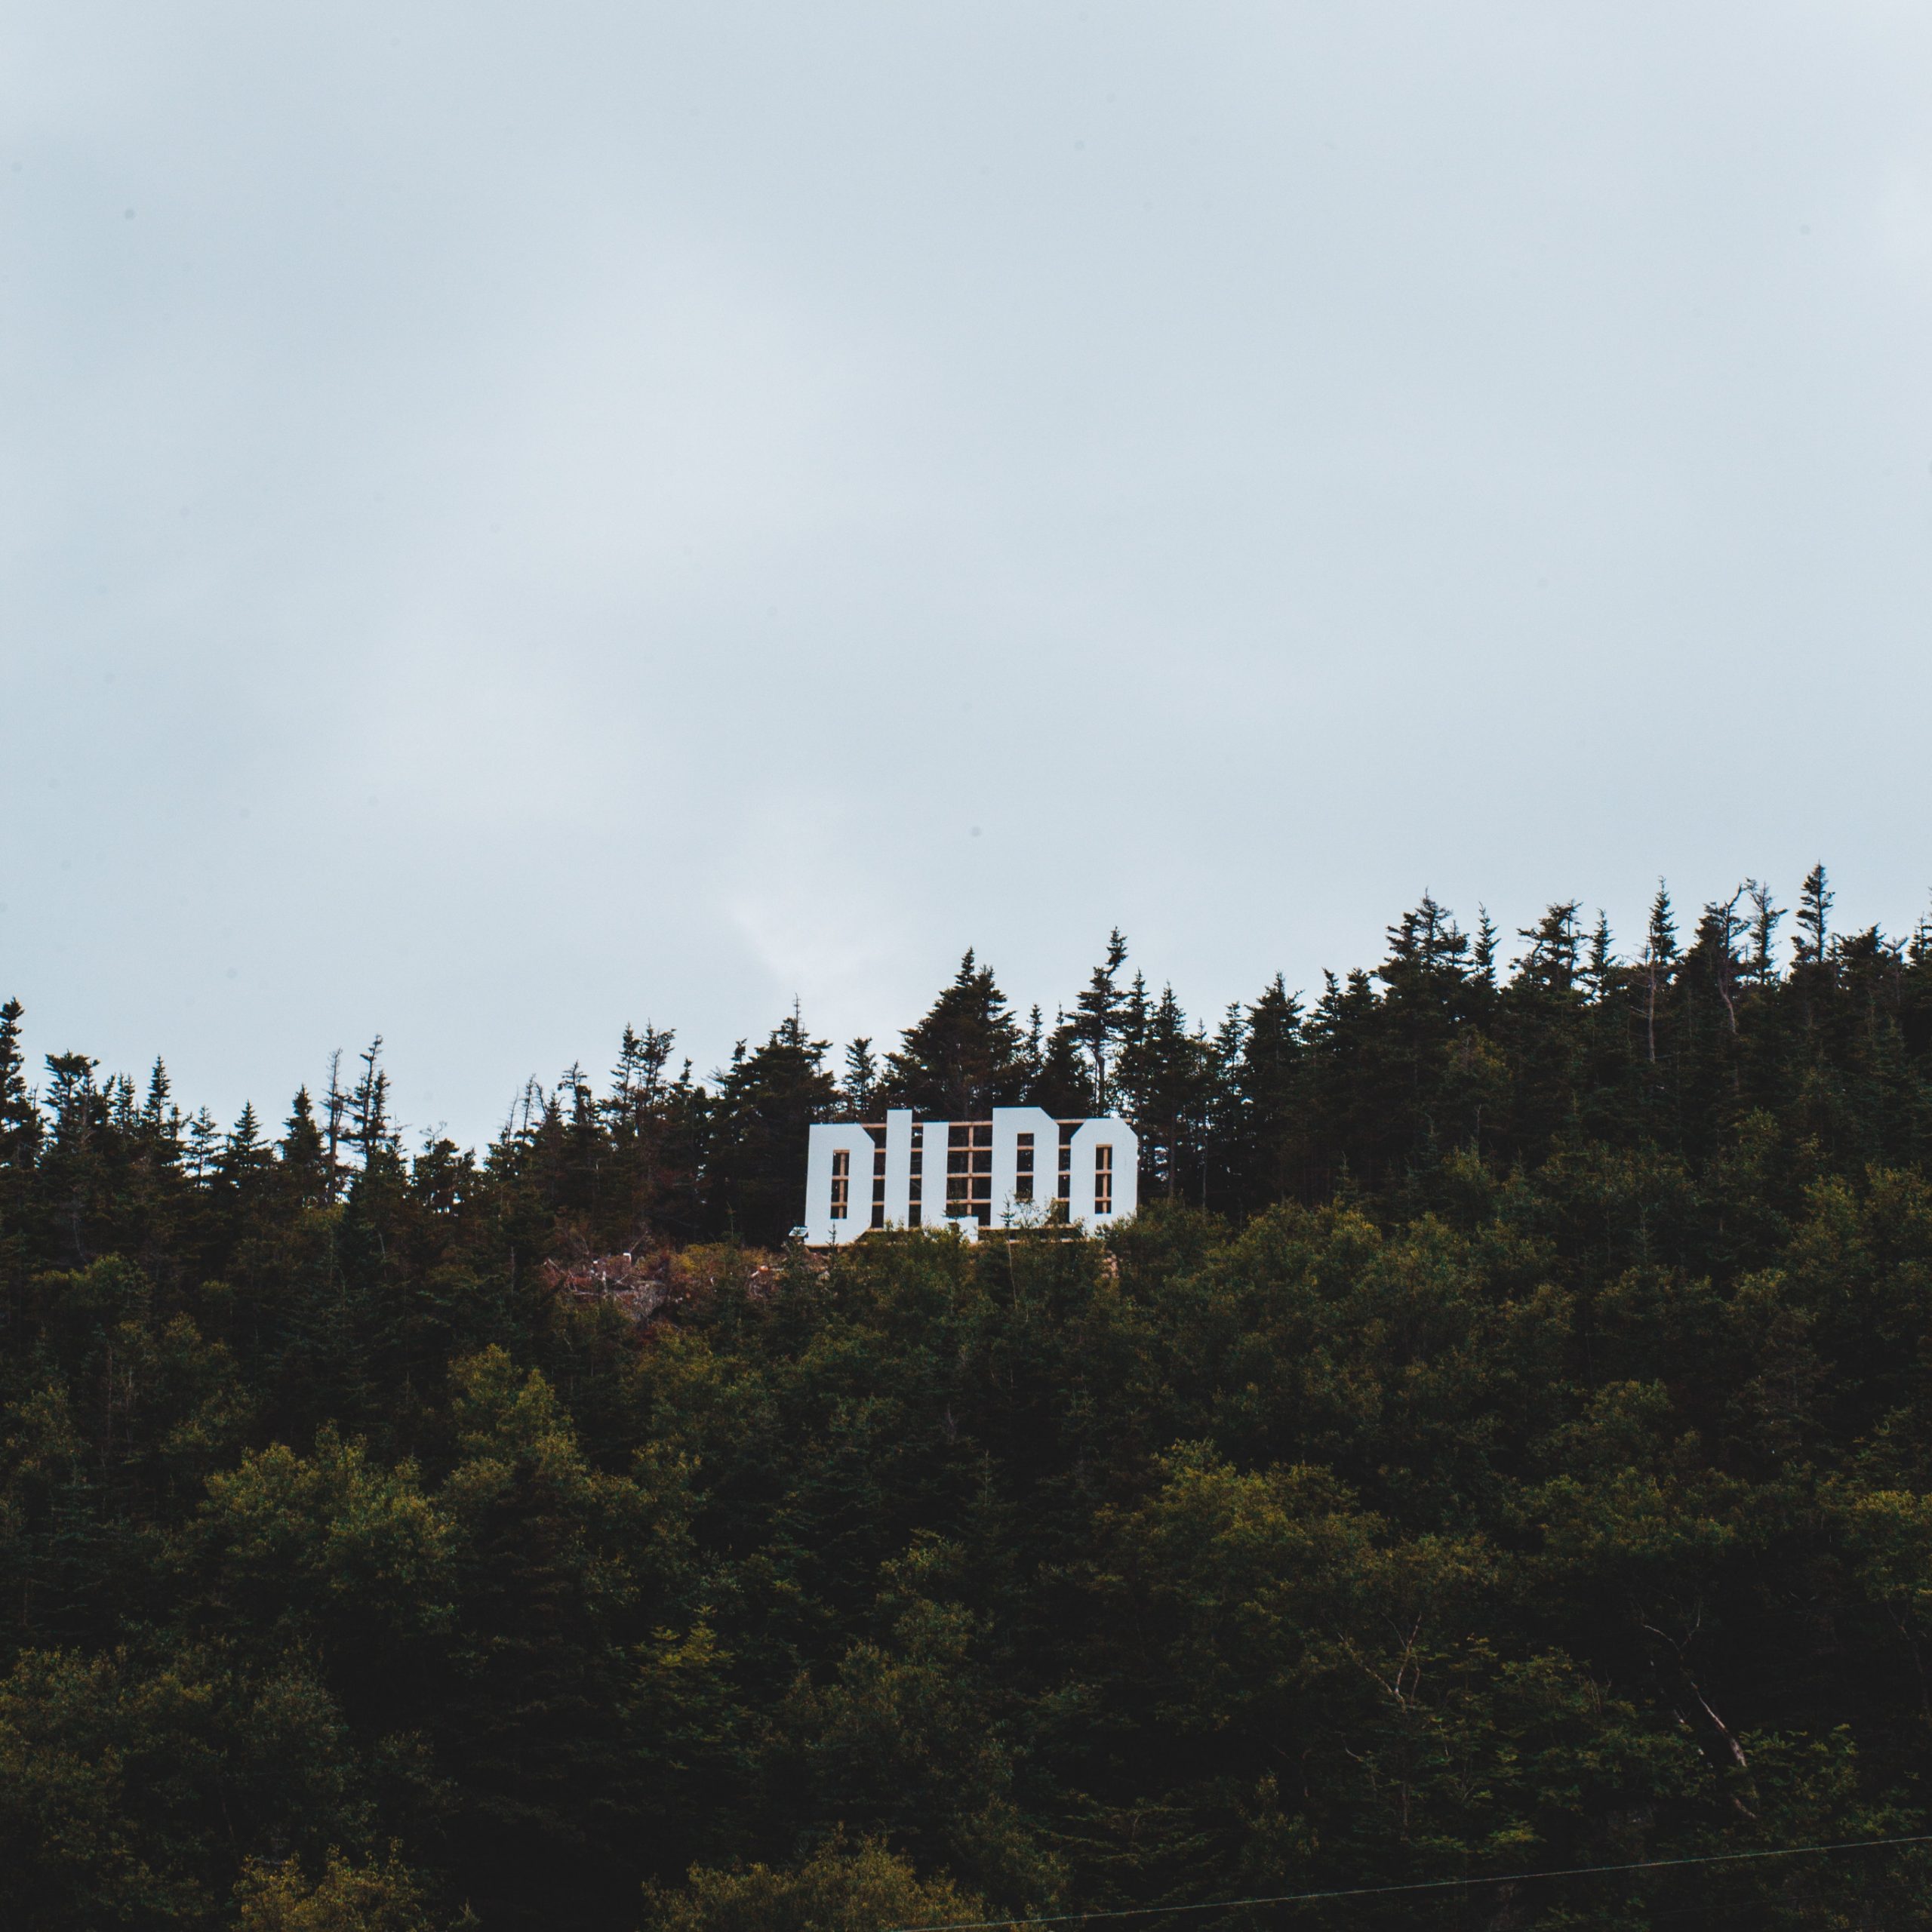 Dildo white letter sign in the mountains